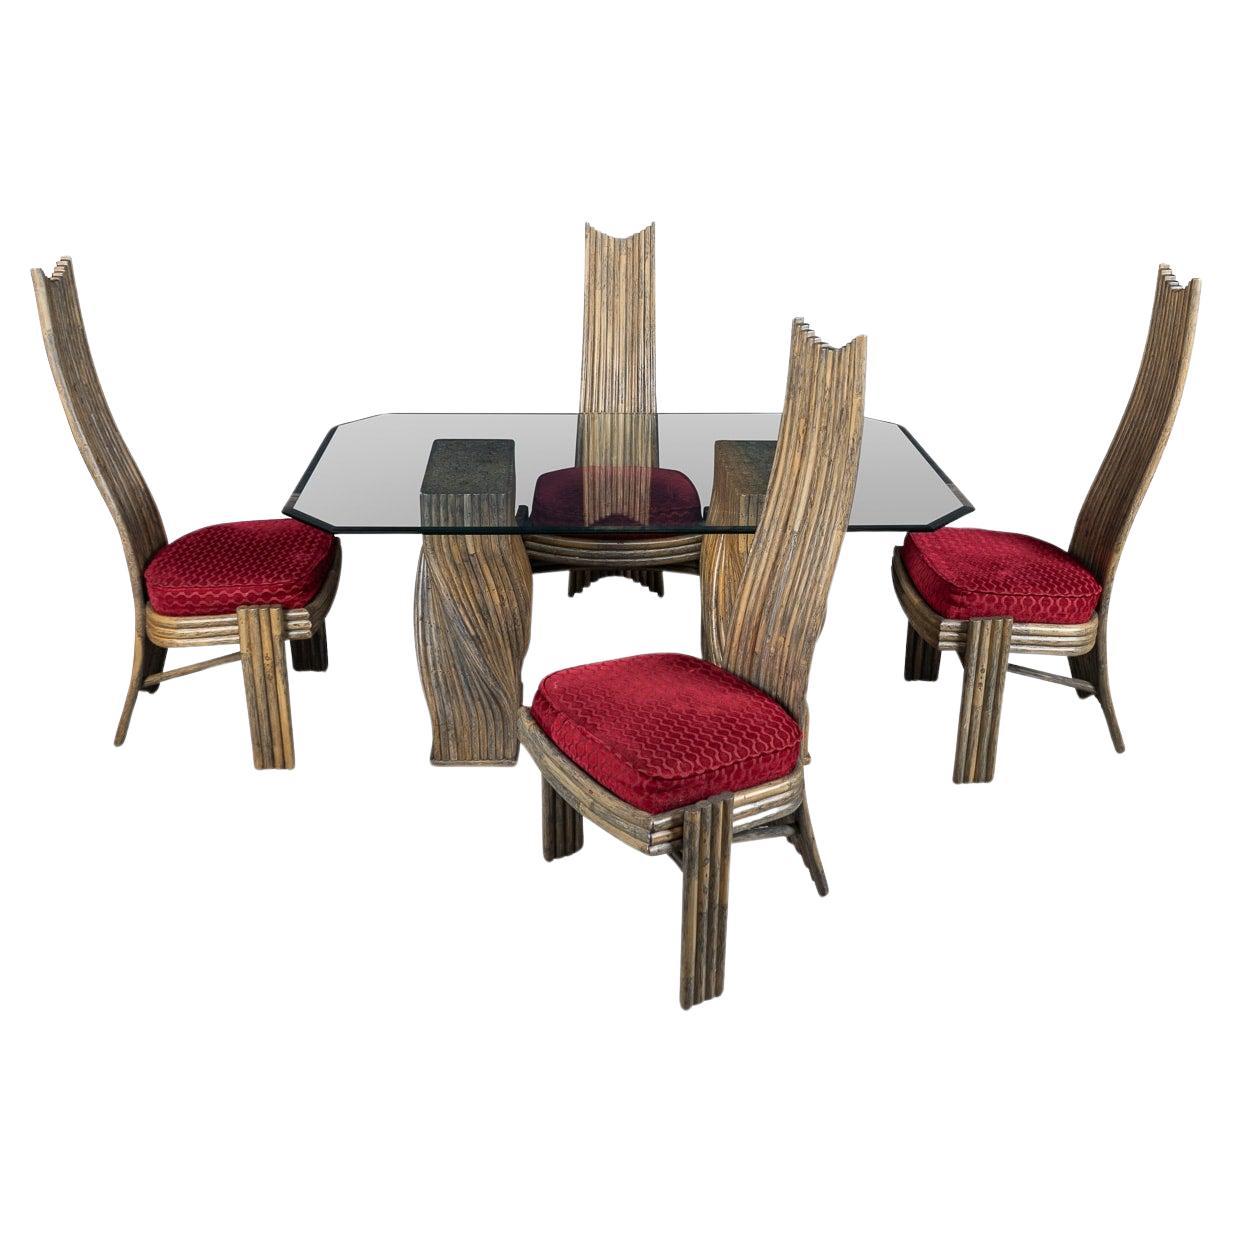 20th Century American Dining Table & Four Chairs By McGuire